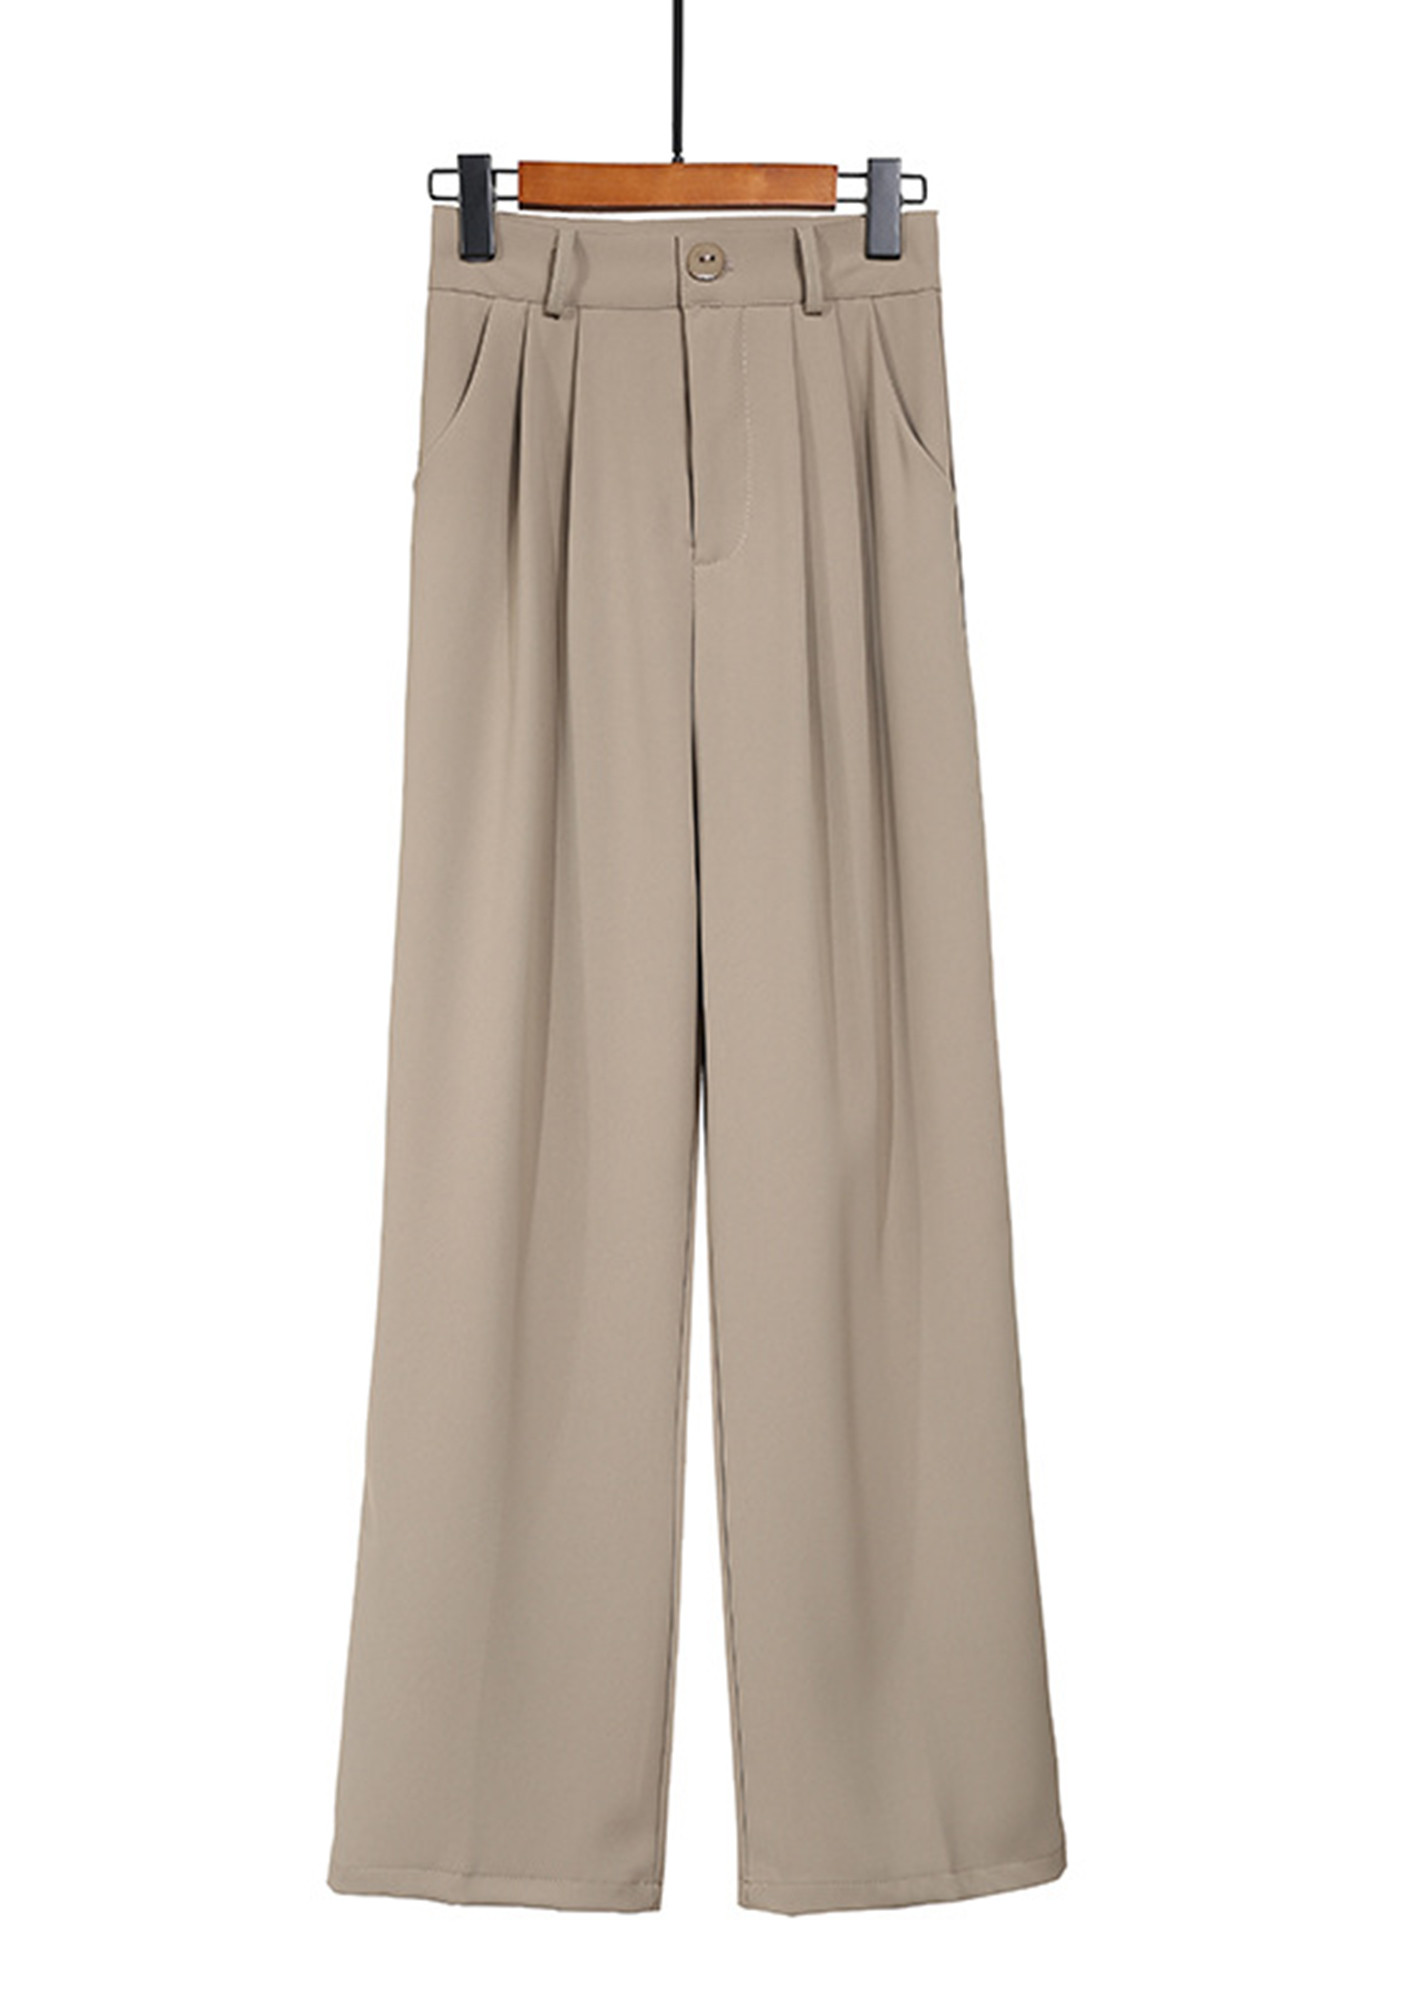 Solid Trousers - Buy Solid Trousers online in India